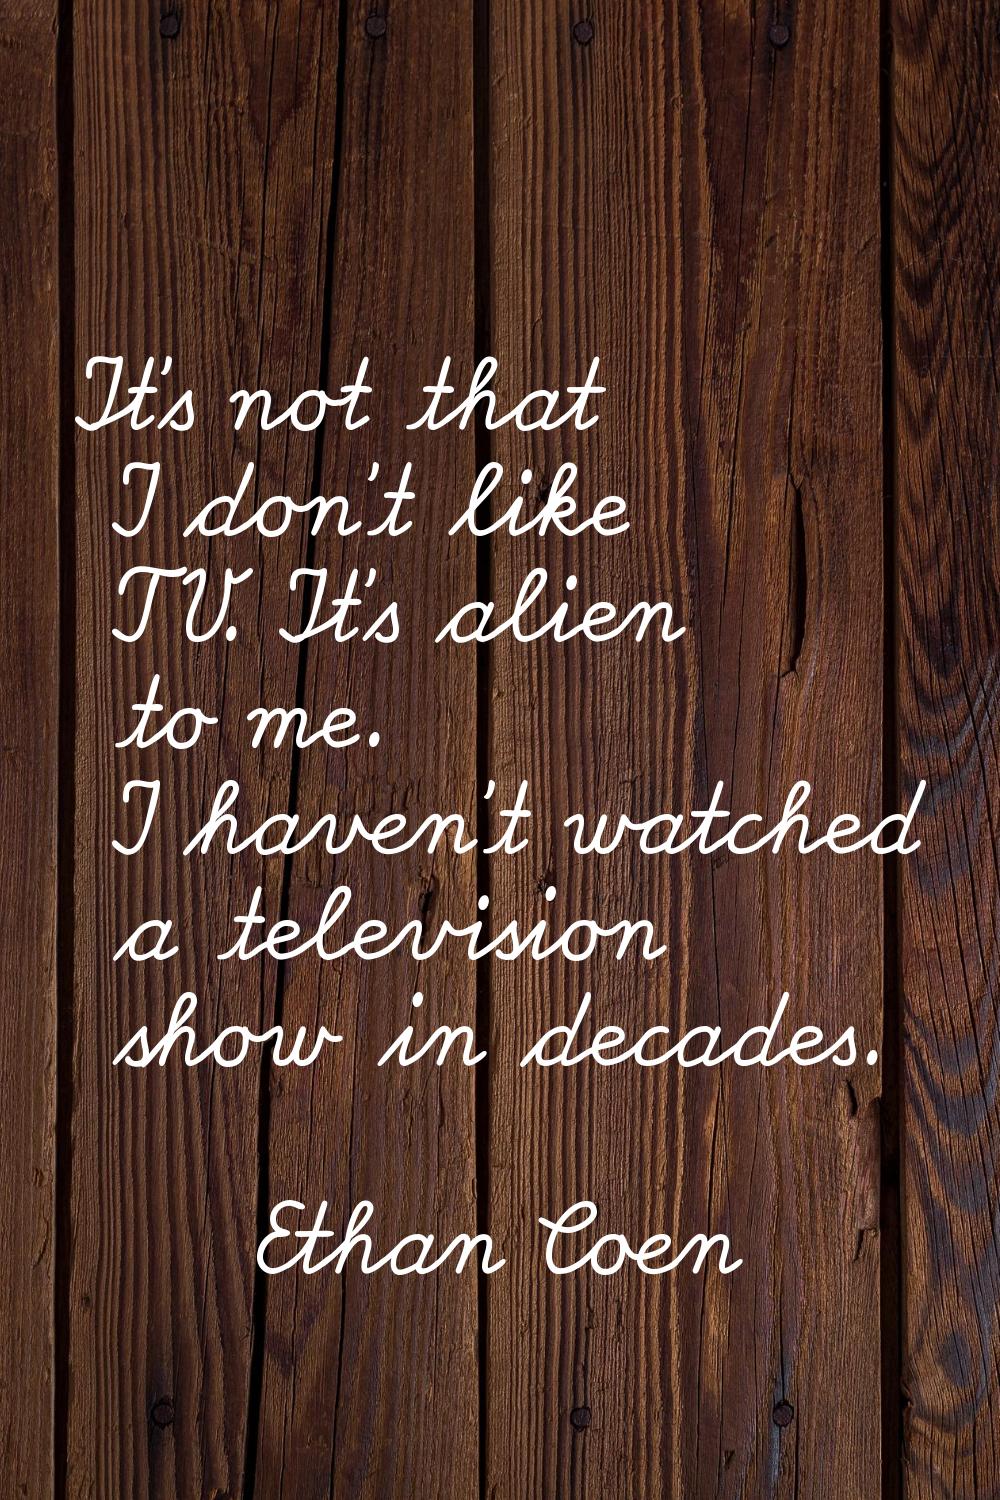 It's not that I don't like TV. It's alien to me. I haven't watched a television show in decades.